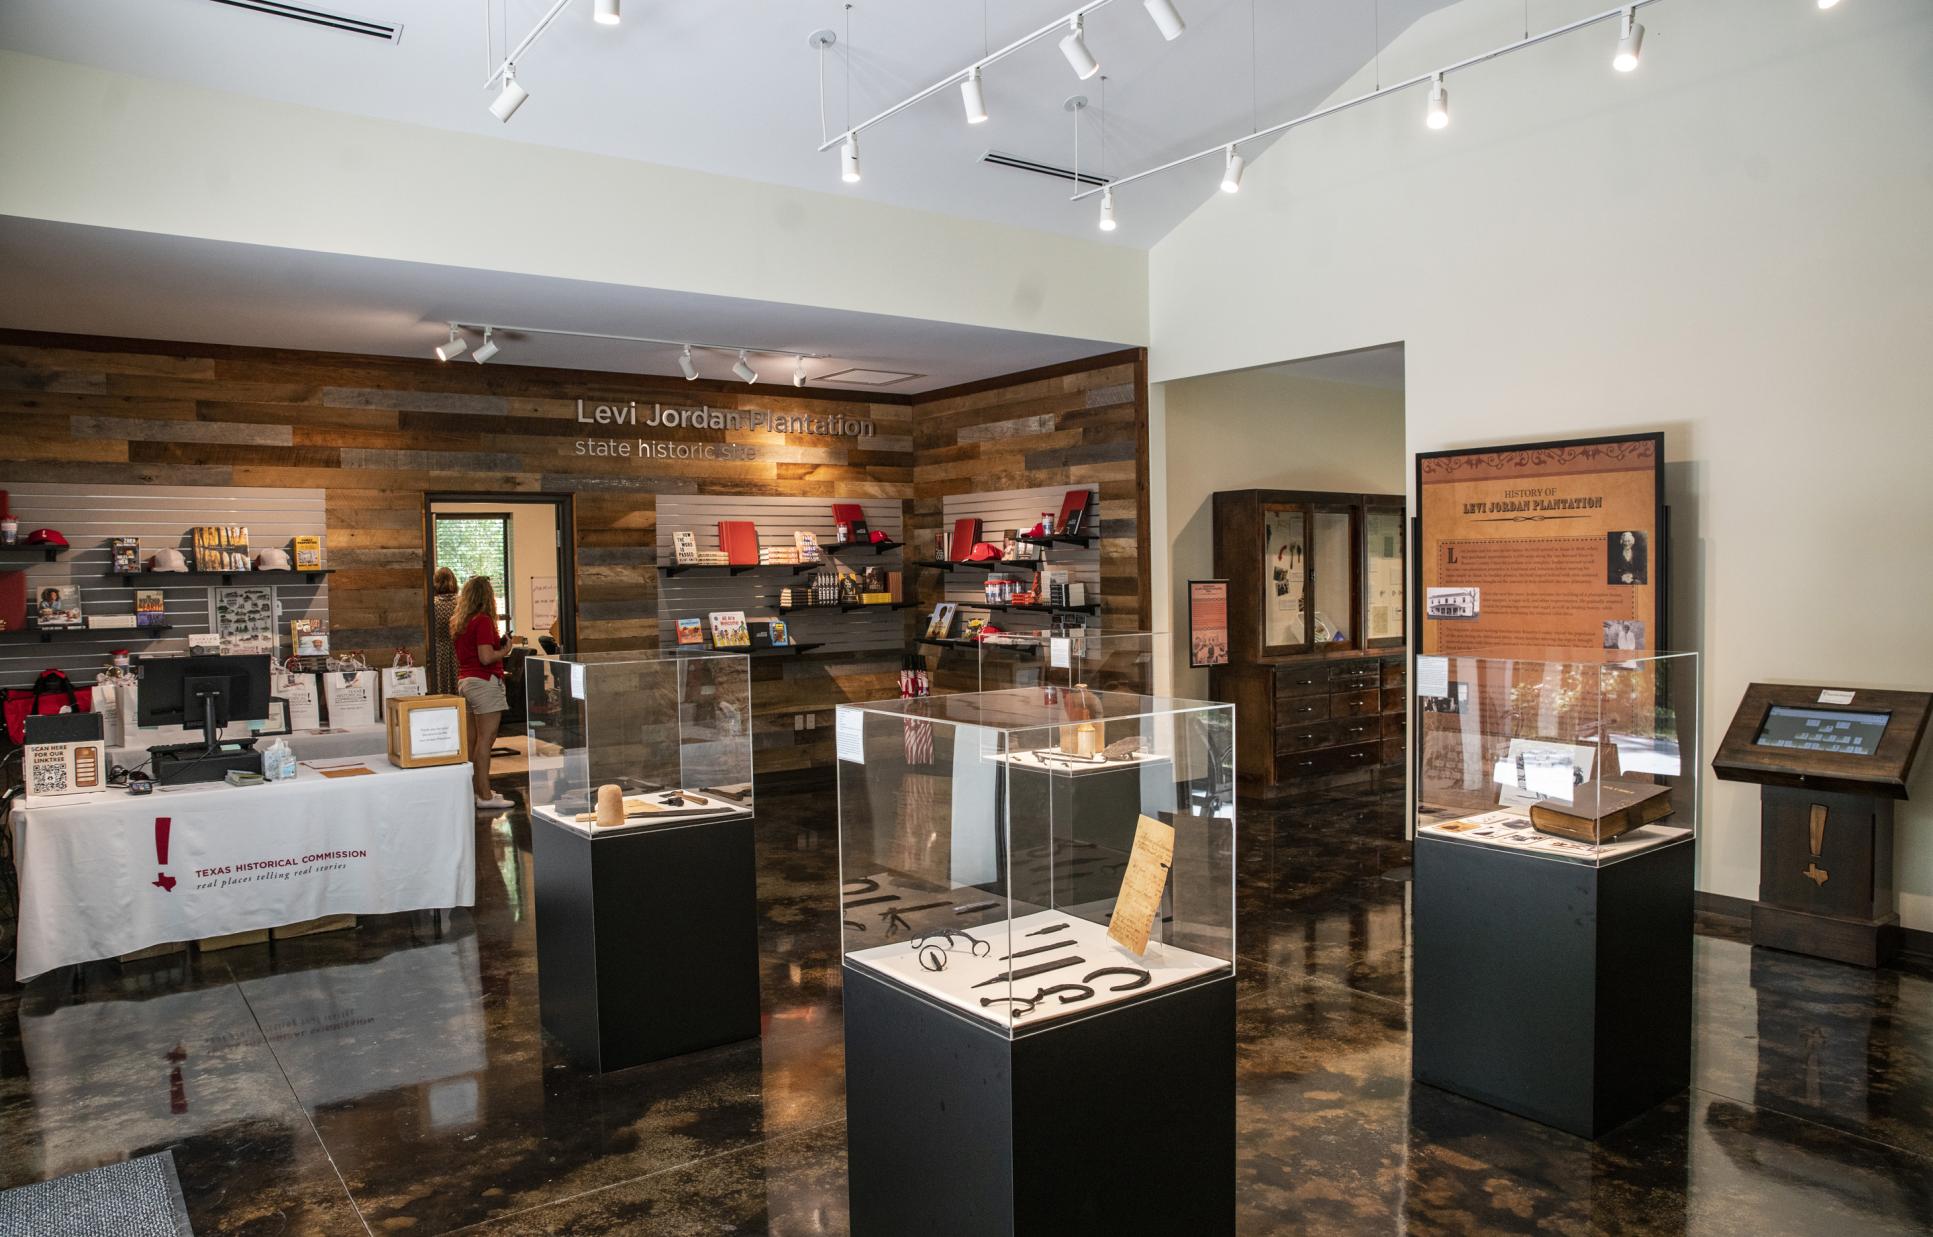 Gift shop and exhibit gallery at Levi Jordan